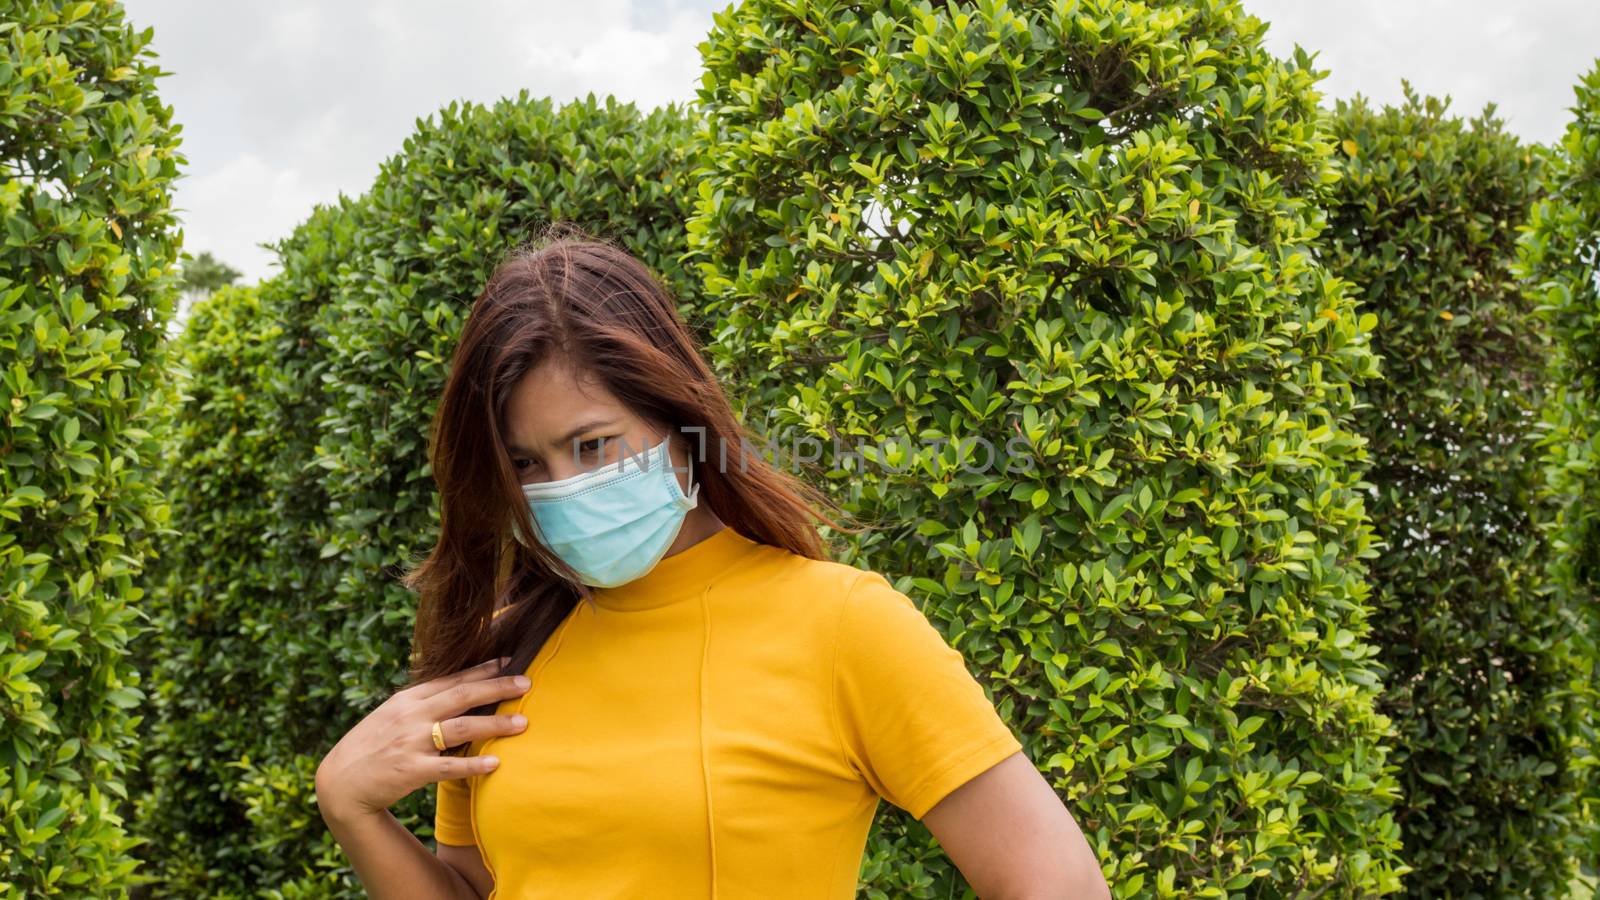 Portraits of women wearing protective masks During travel With a background of green trees